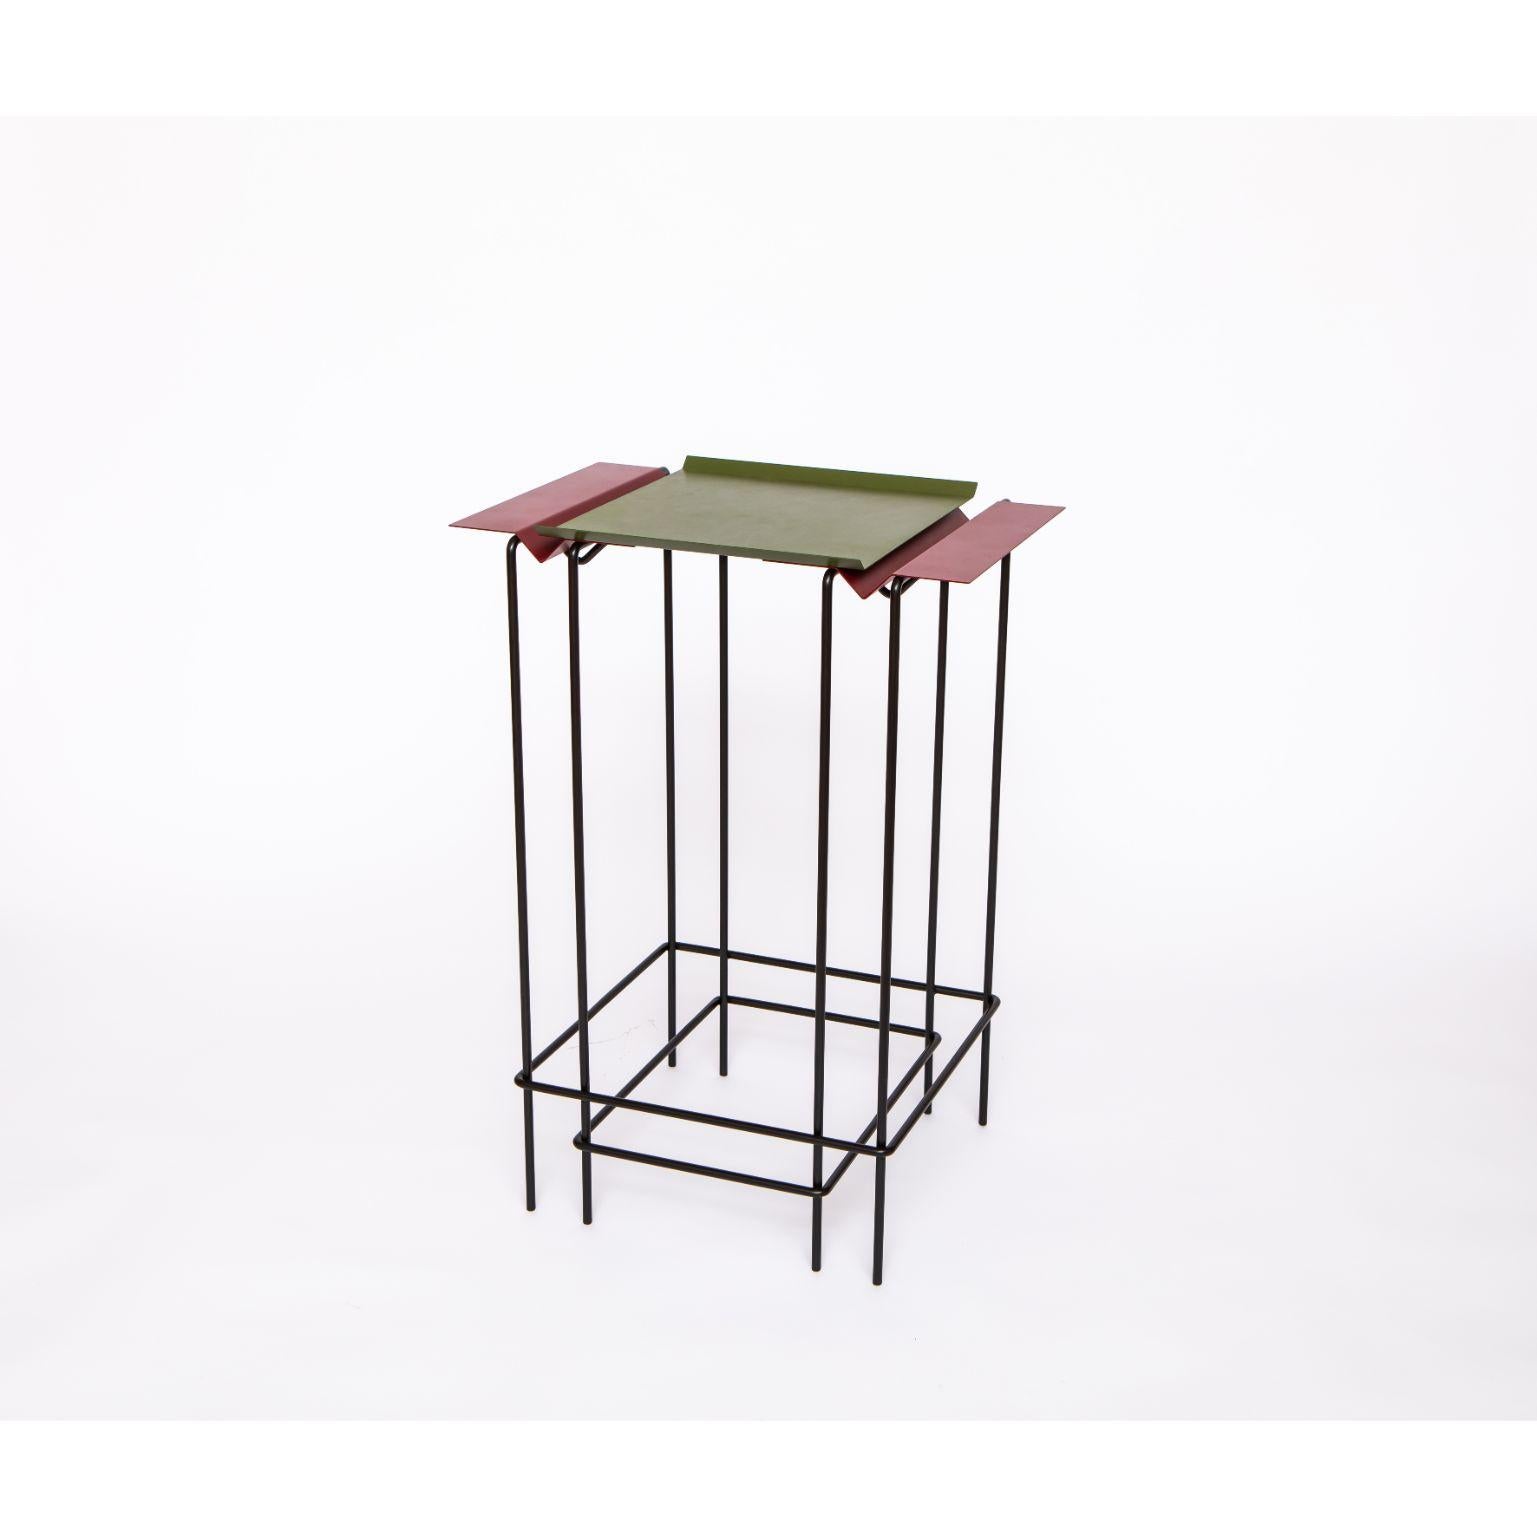 Leva 60 - Table by Alva Design
Materials: Painted metal, stainless steel
Dimensions: 643 x 60 x 32 cm

ALVA is a furniture and objects design office, formed by brothers Susana Bastos, artist and designer, and Marcelo Alvarenga, architect. Their